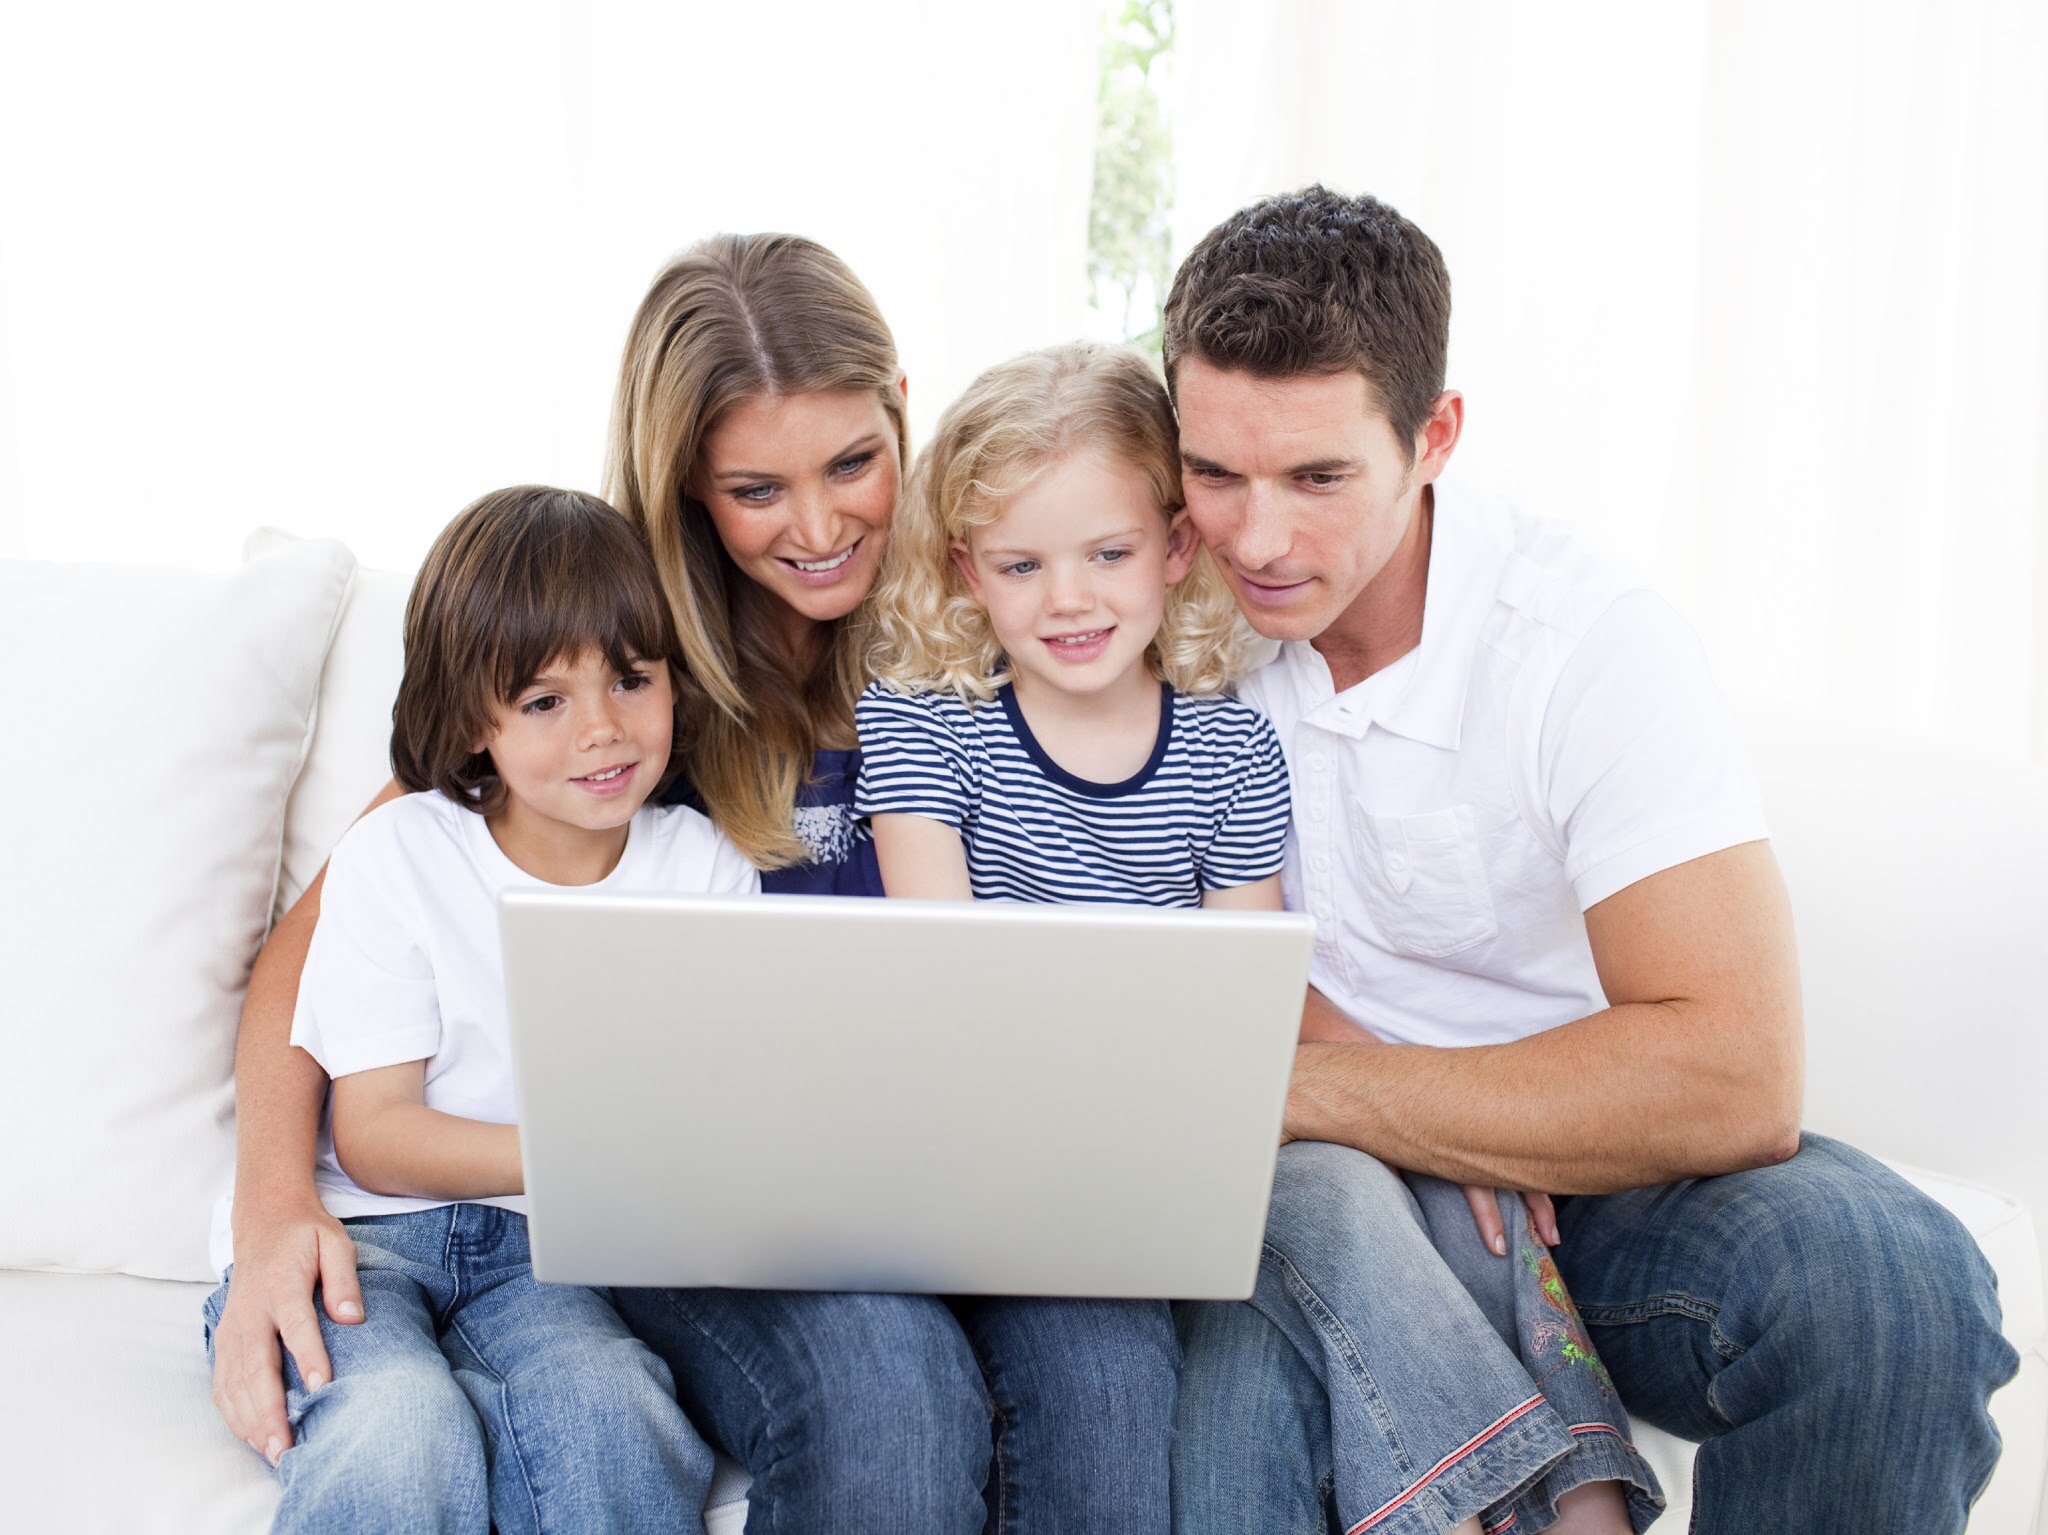 Study Offers Insight, Advice For Family Tech Rules